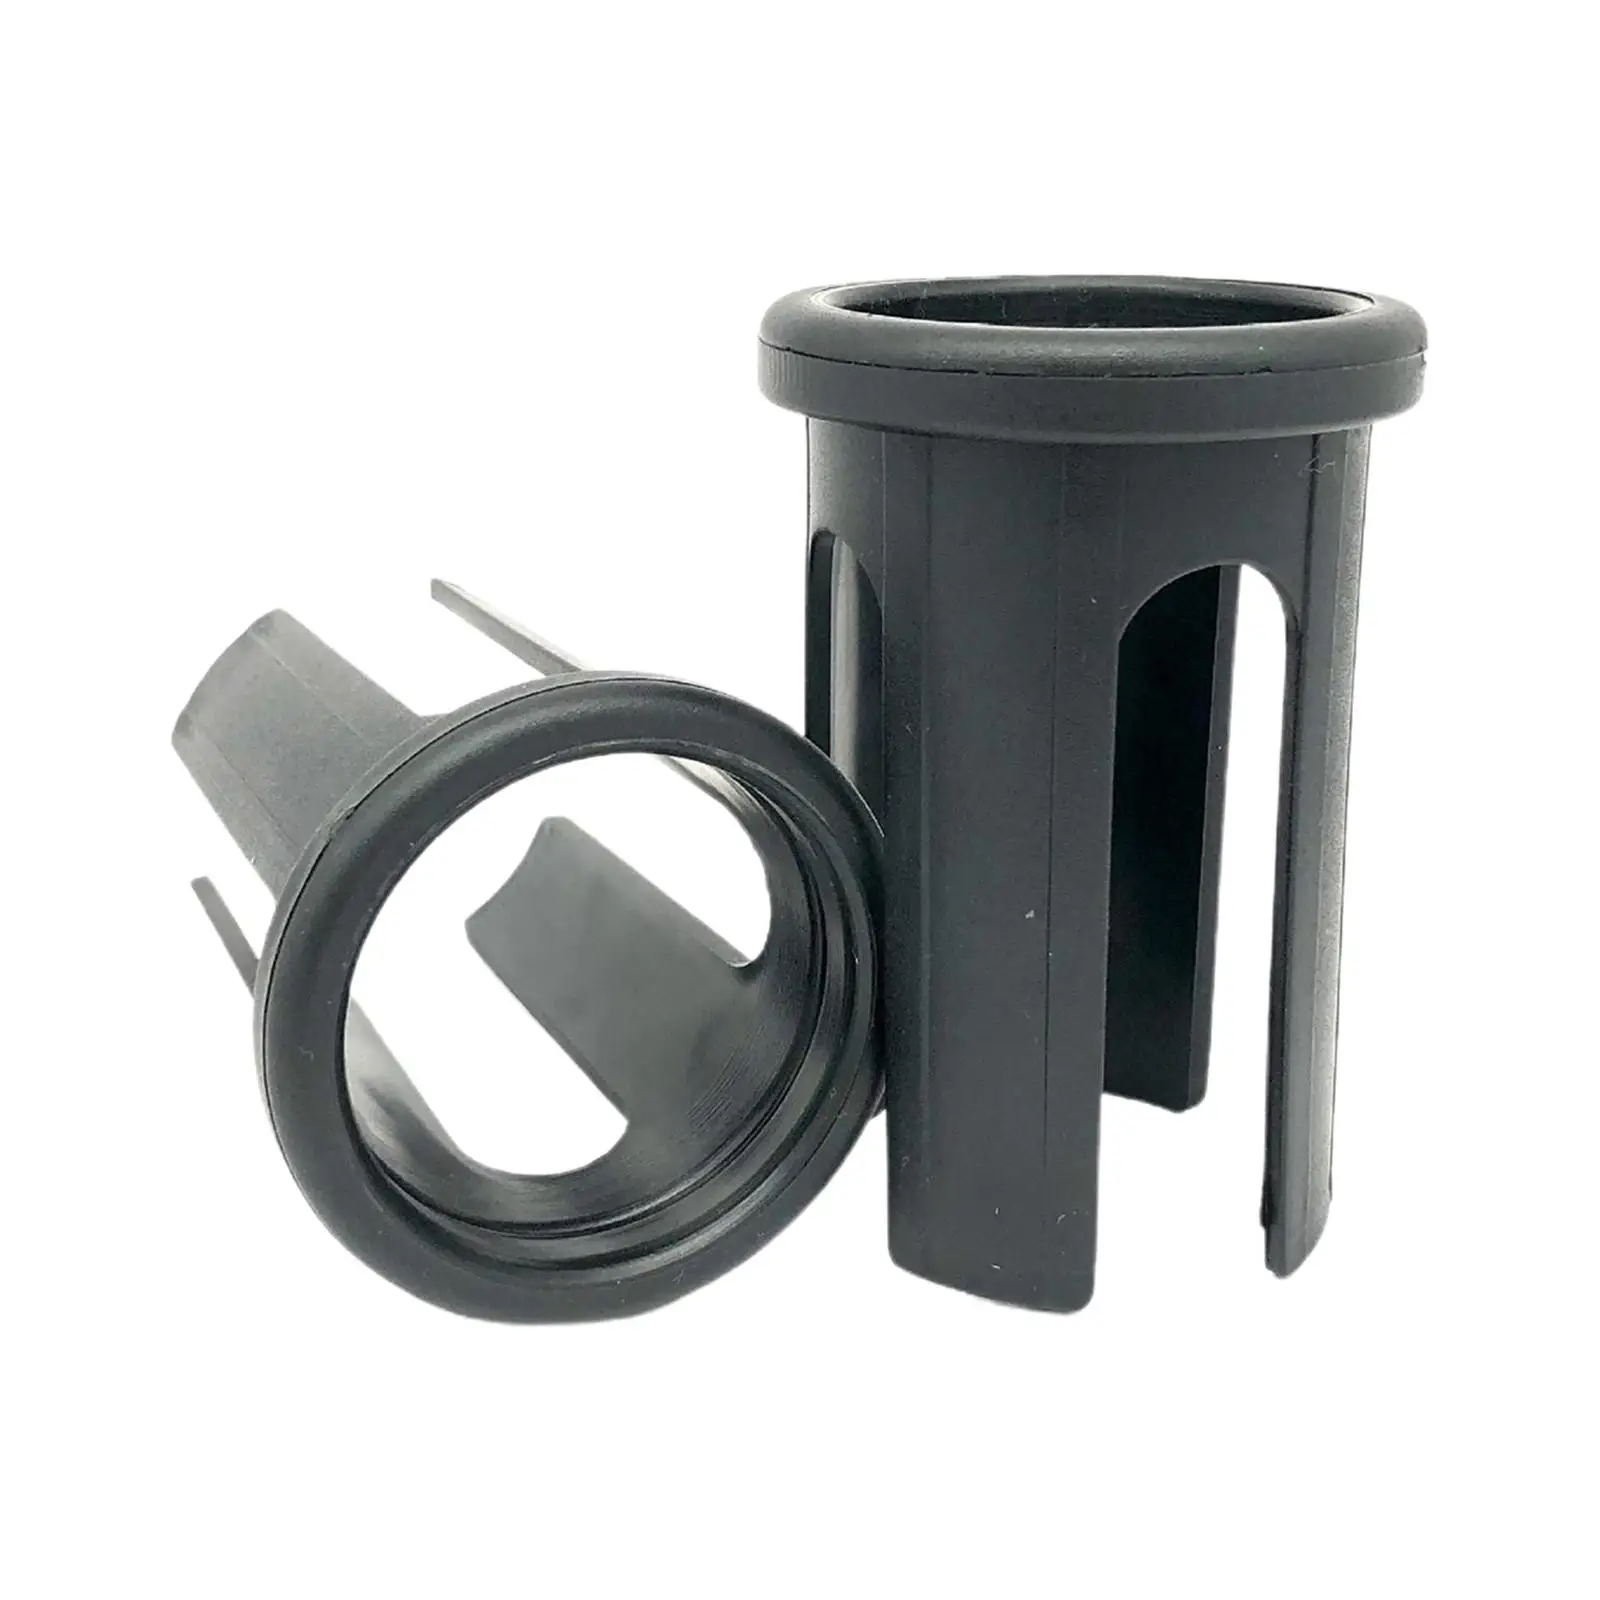 Adapter Sleeve Accessories Convert Weight Posts Components for Weightlifting